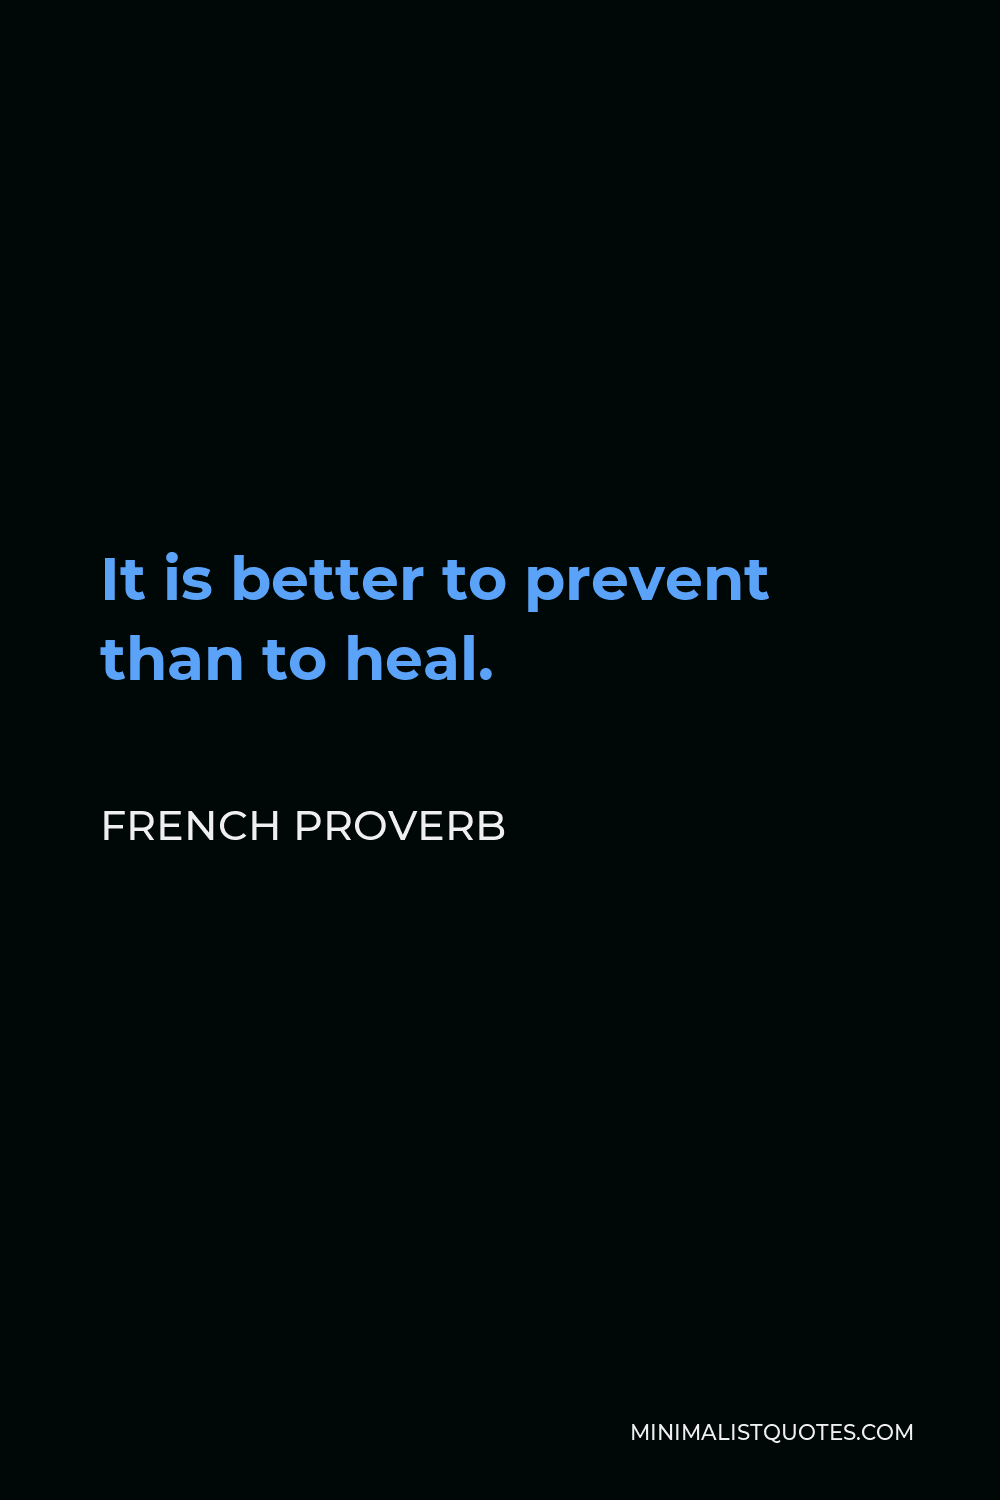 French Proverb Quote - It is better to prevent than to heal.